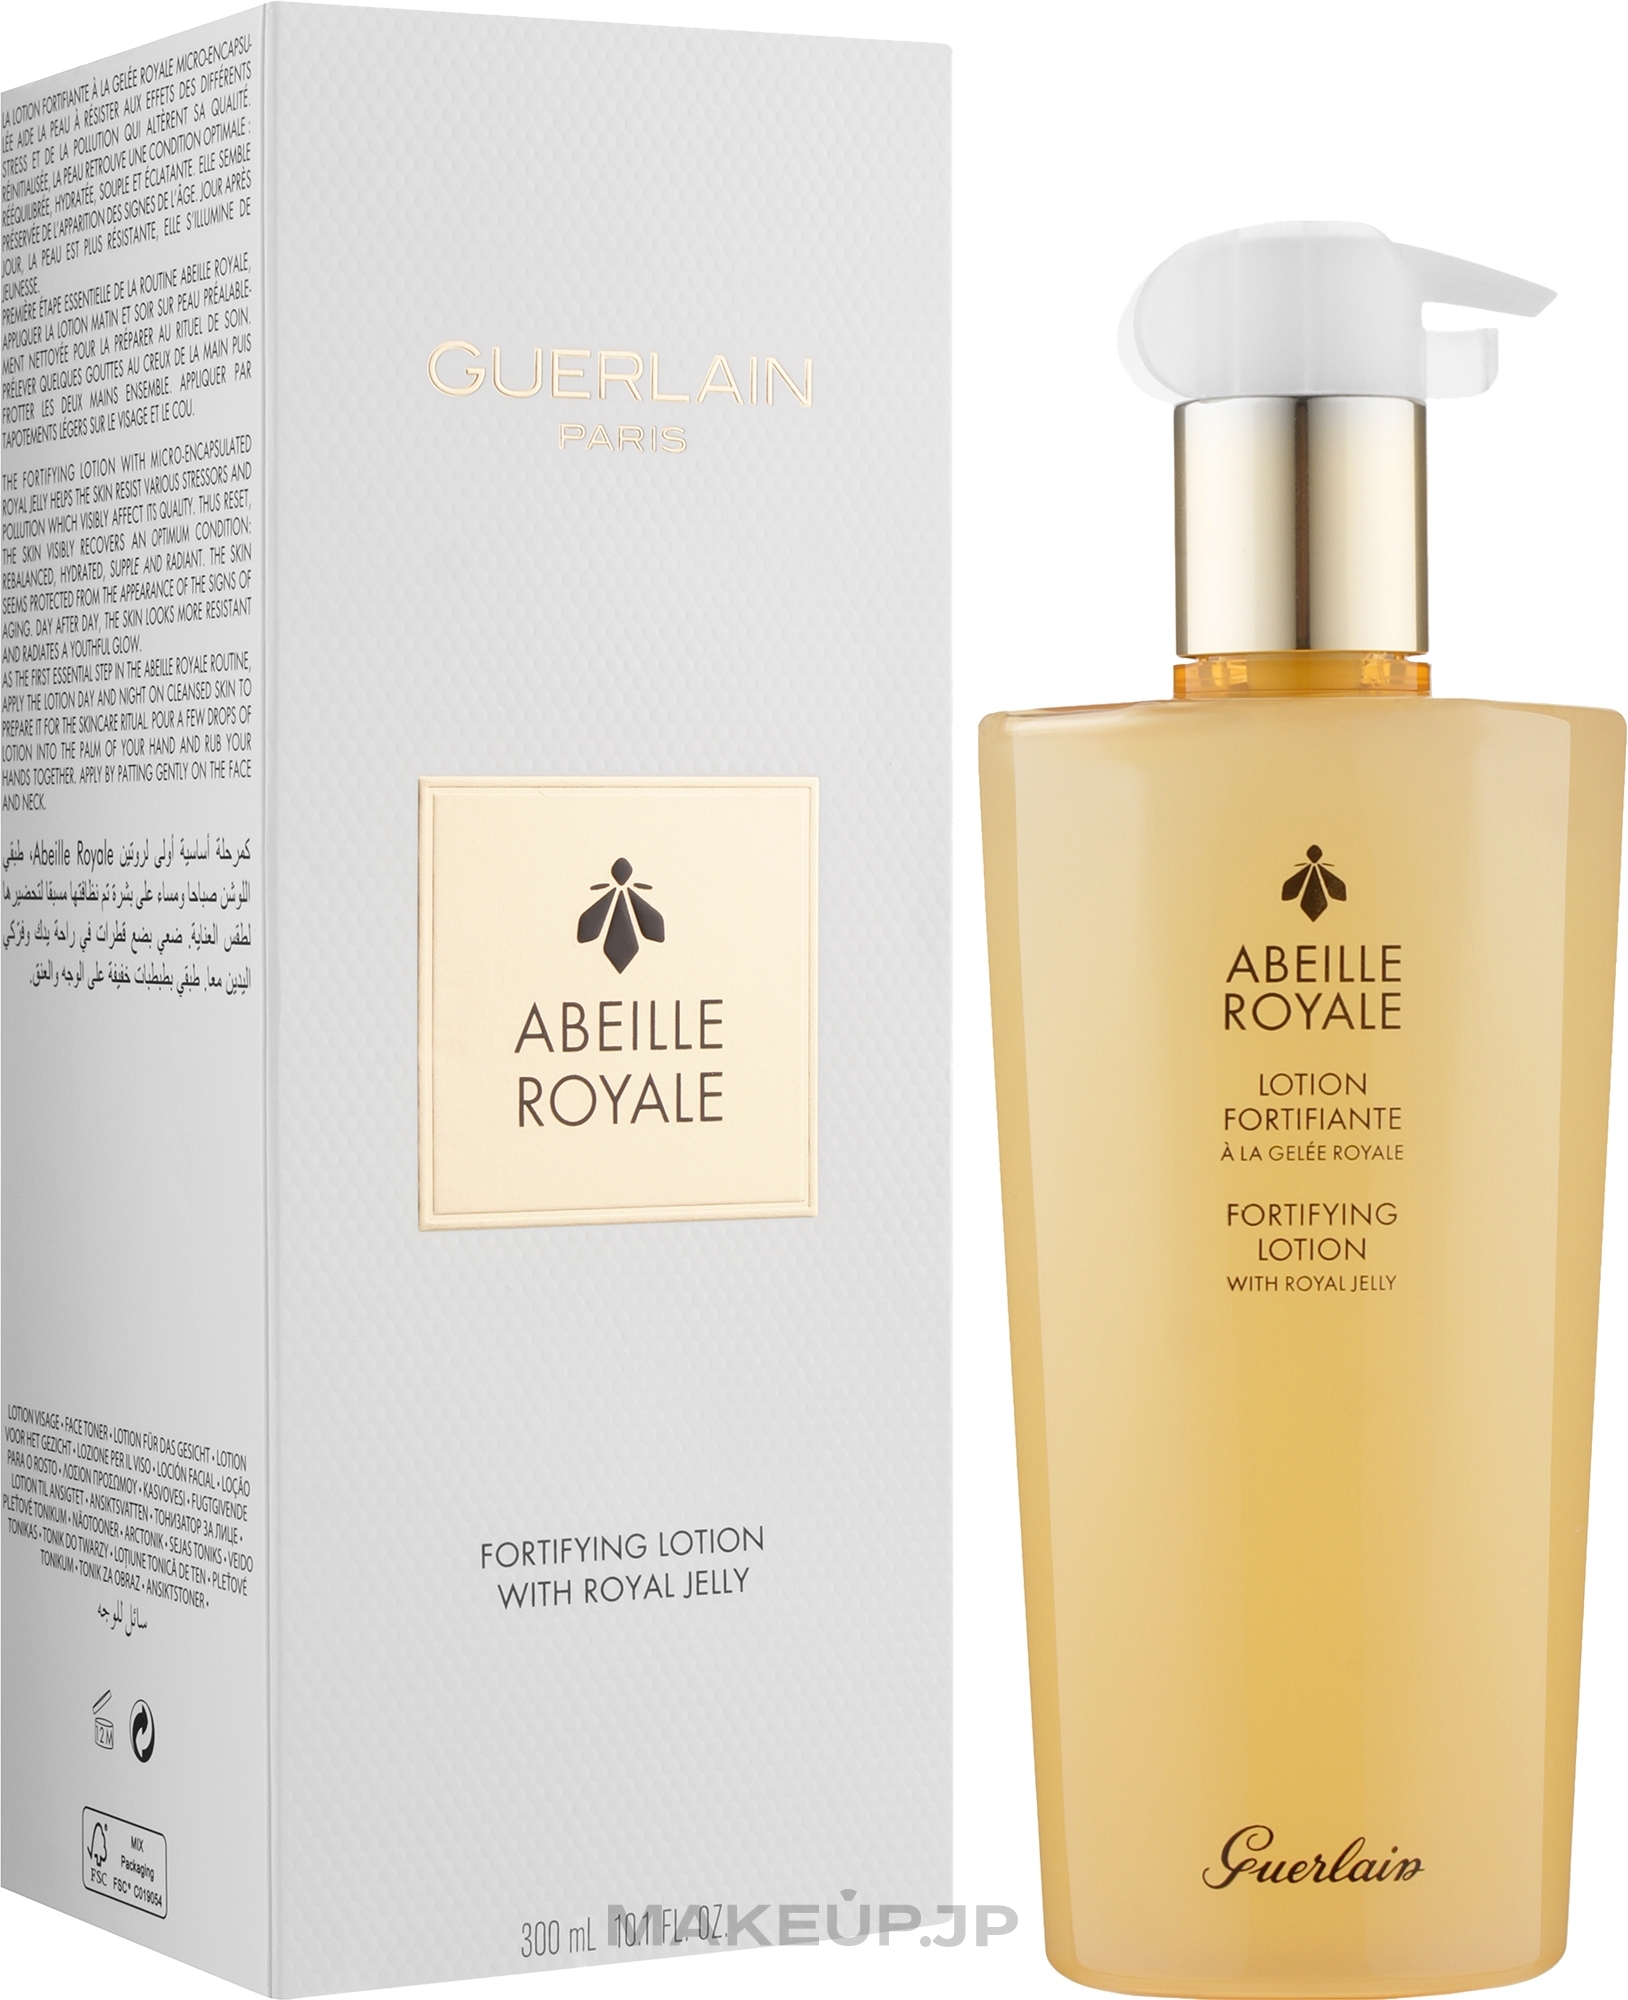 Royal Jelly Firming Lotion - Guerlain Abeille Royale Fortifying Lotion — photo 300 ml